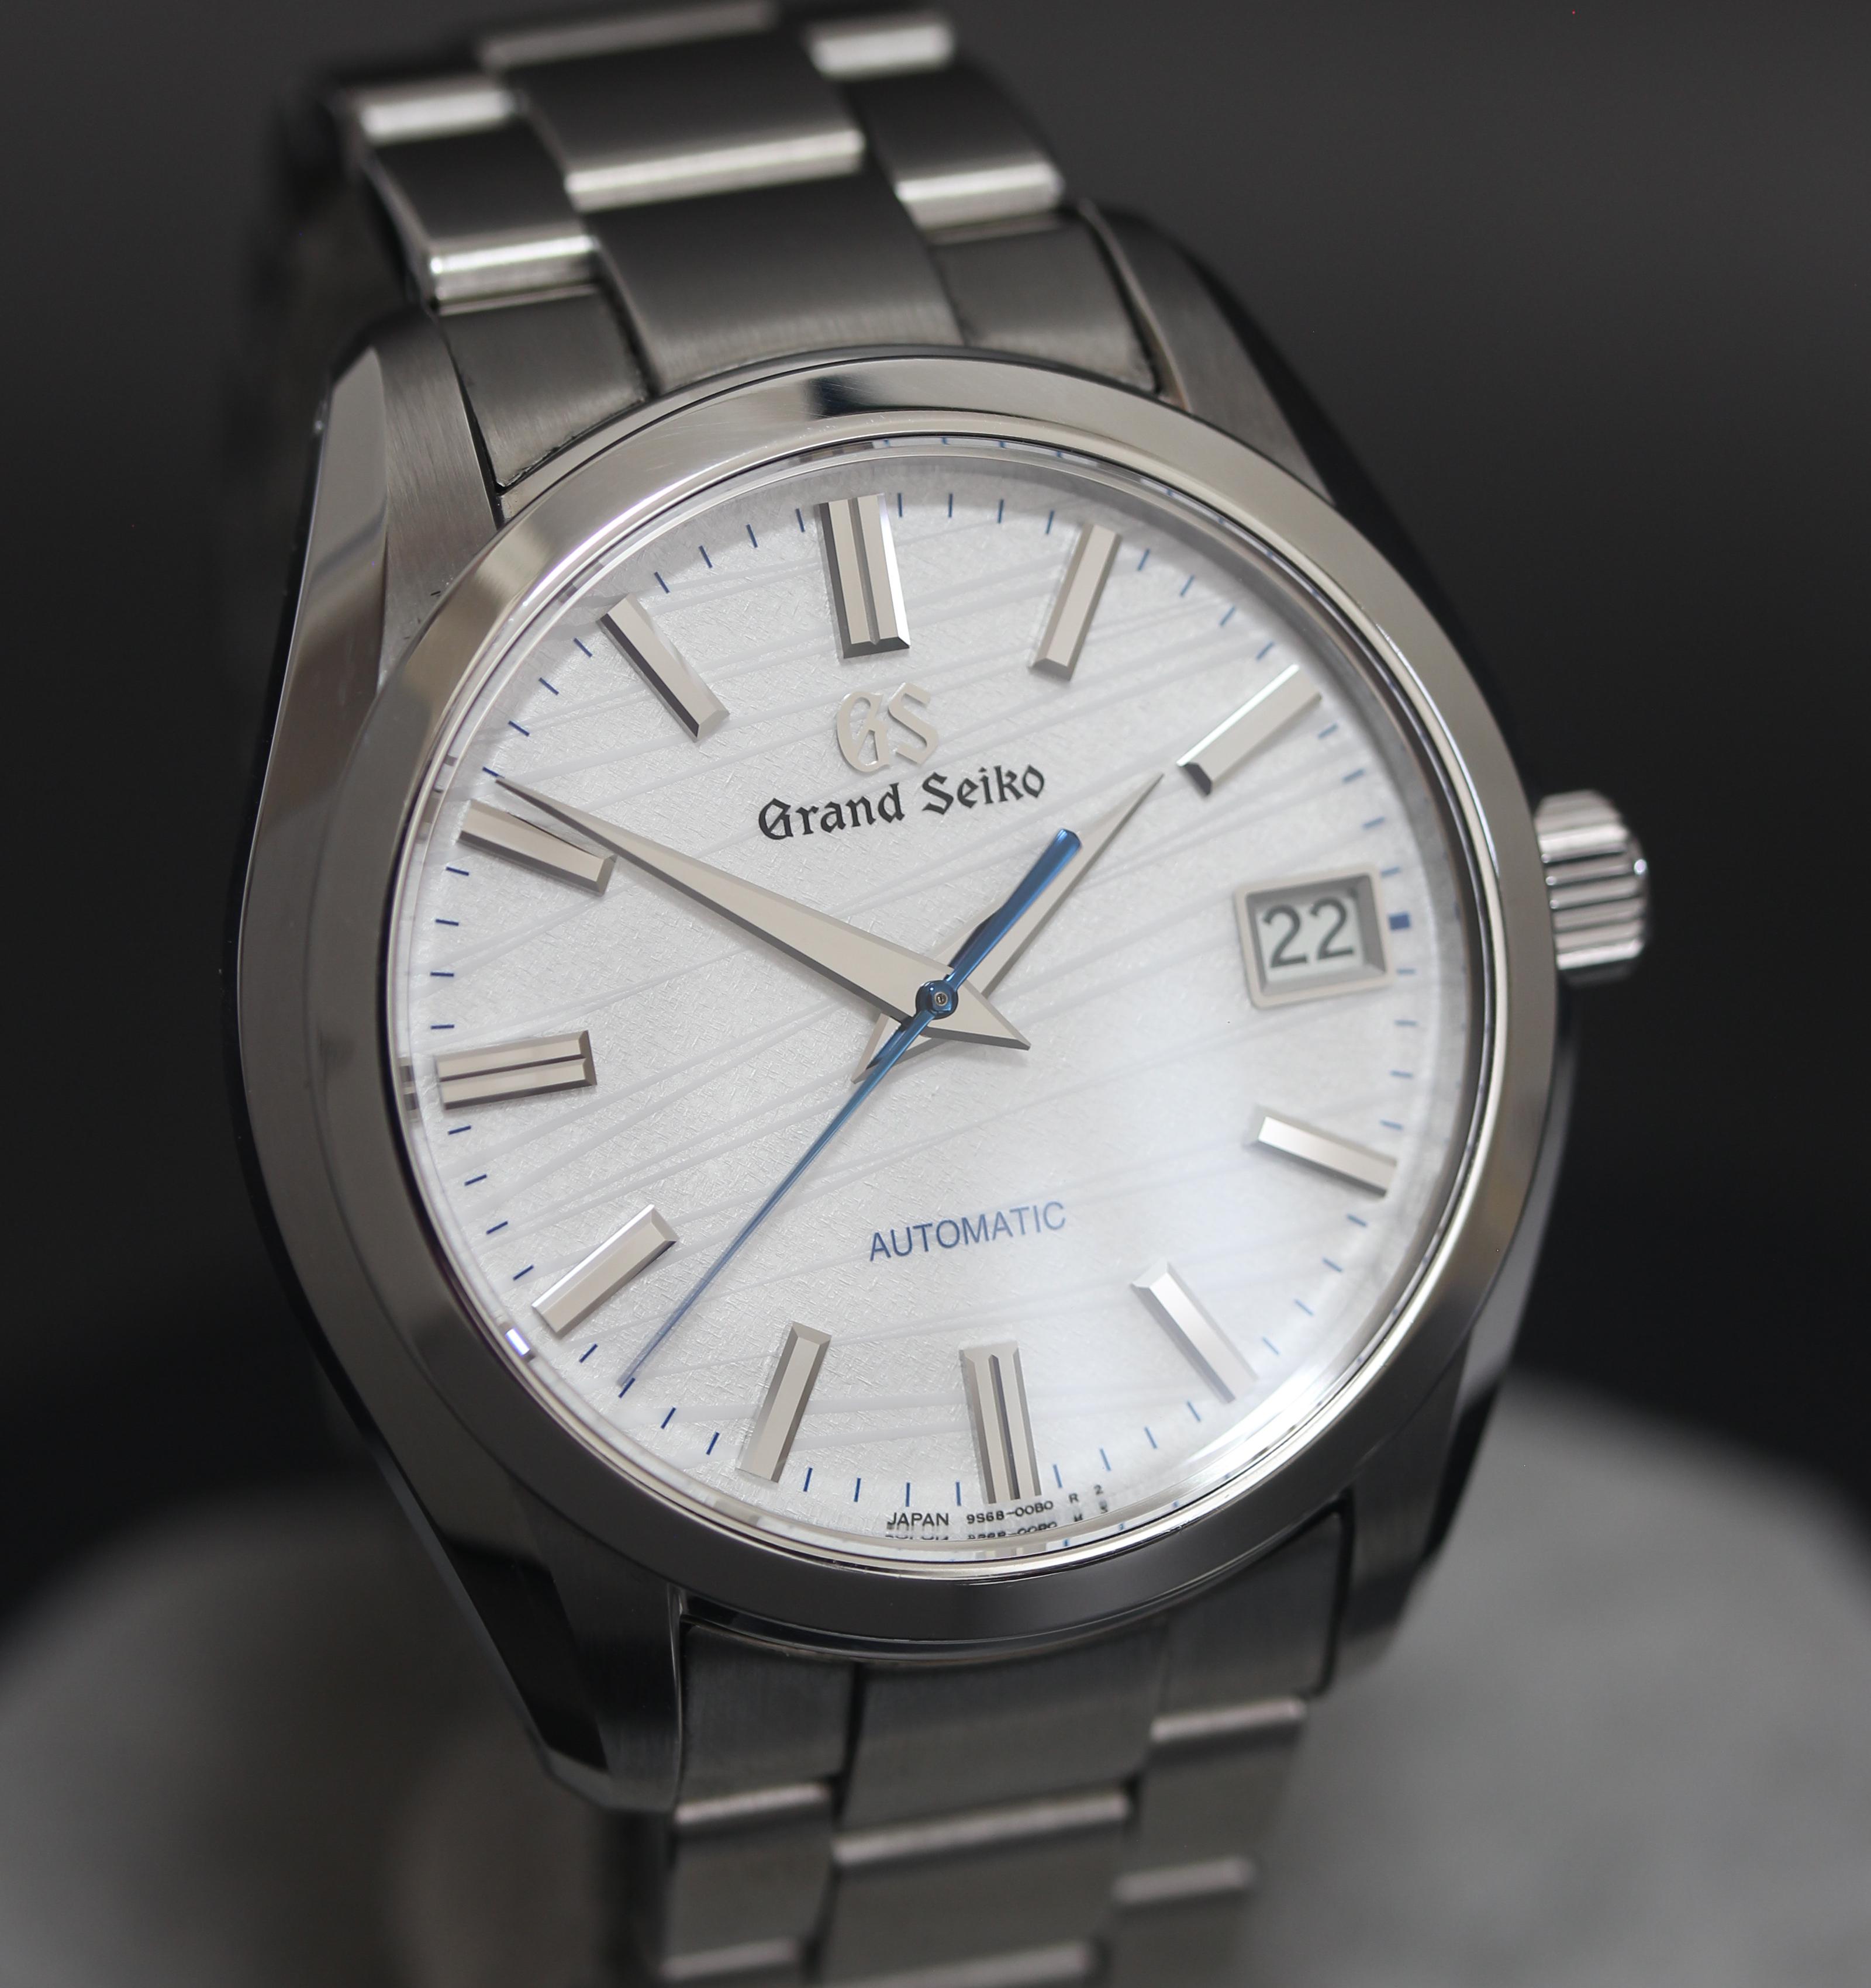 WTS] Grand Seiko Heritage SBGR319 350 Pc Asian LE STEAL - $3,500 |  WatchCharts